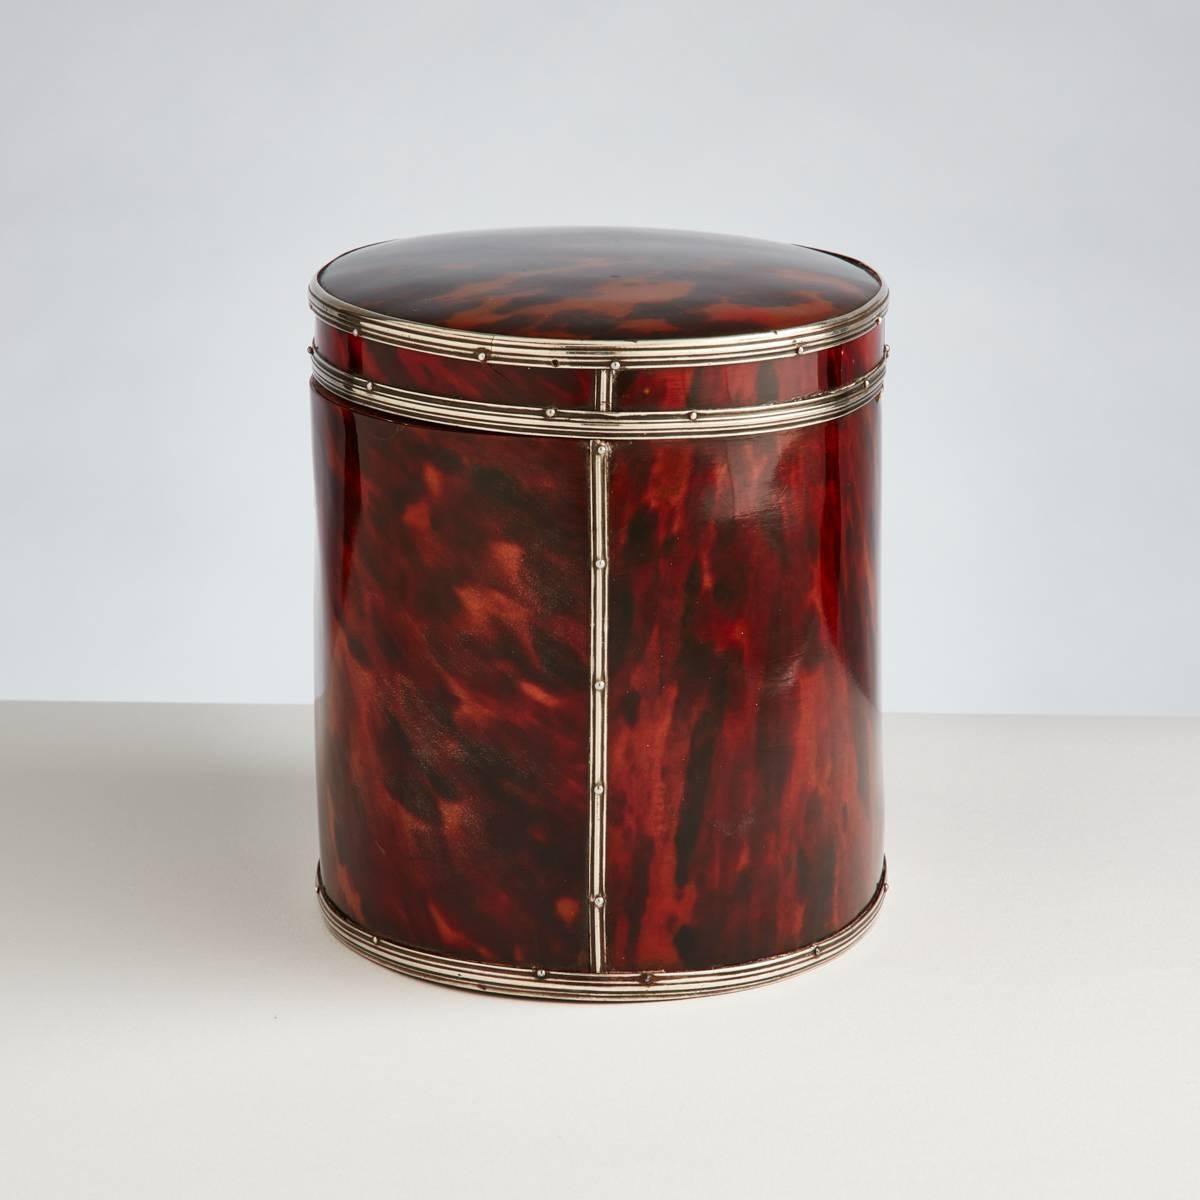 The shell has a beautiful mellow patina and the silver binding to both the lid and body on both sides enhances this piece.

The interior retains its original lining throughout.
  